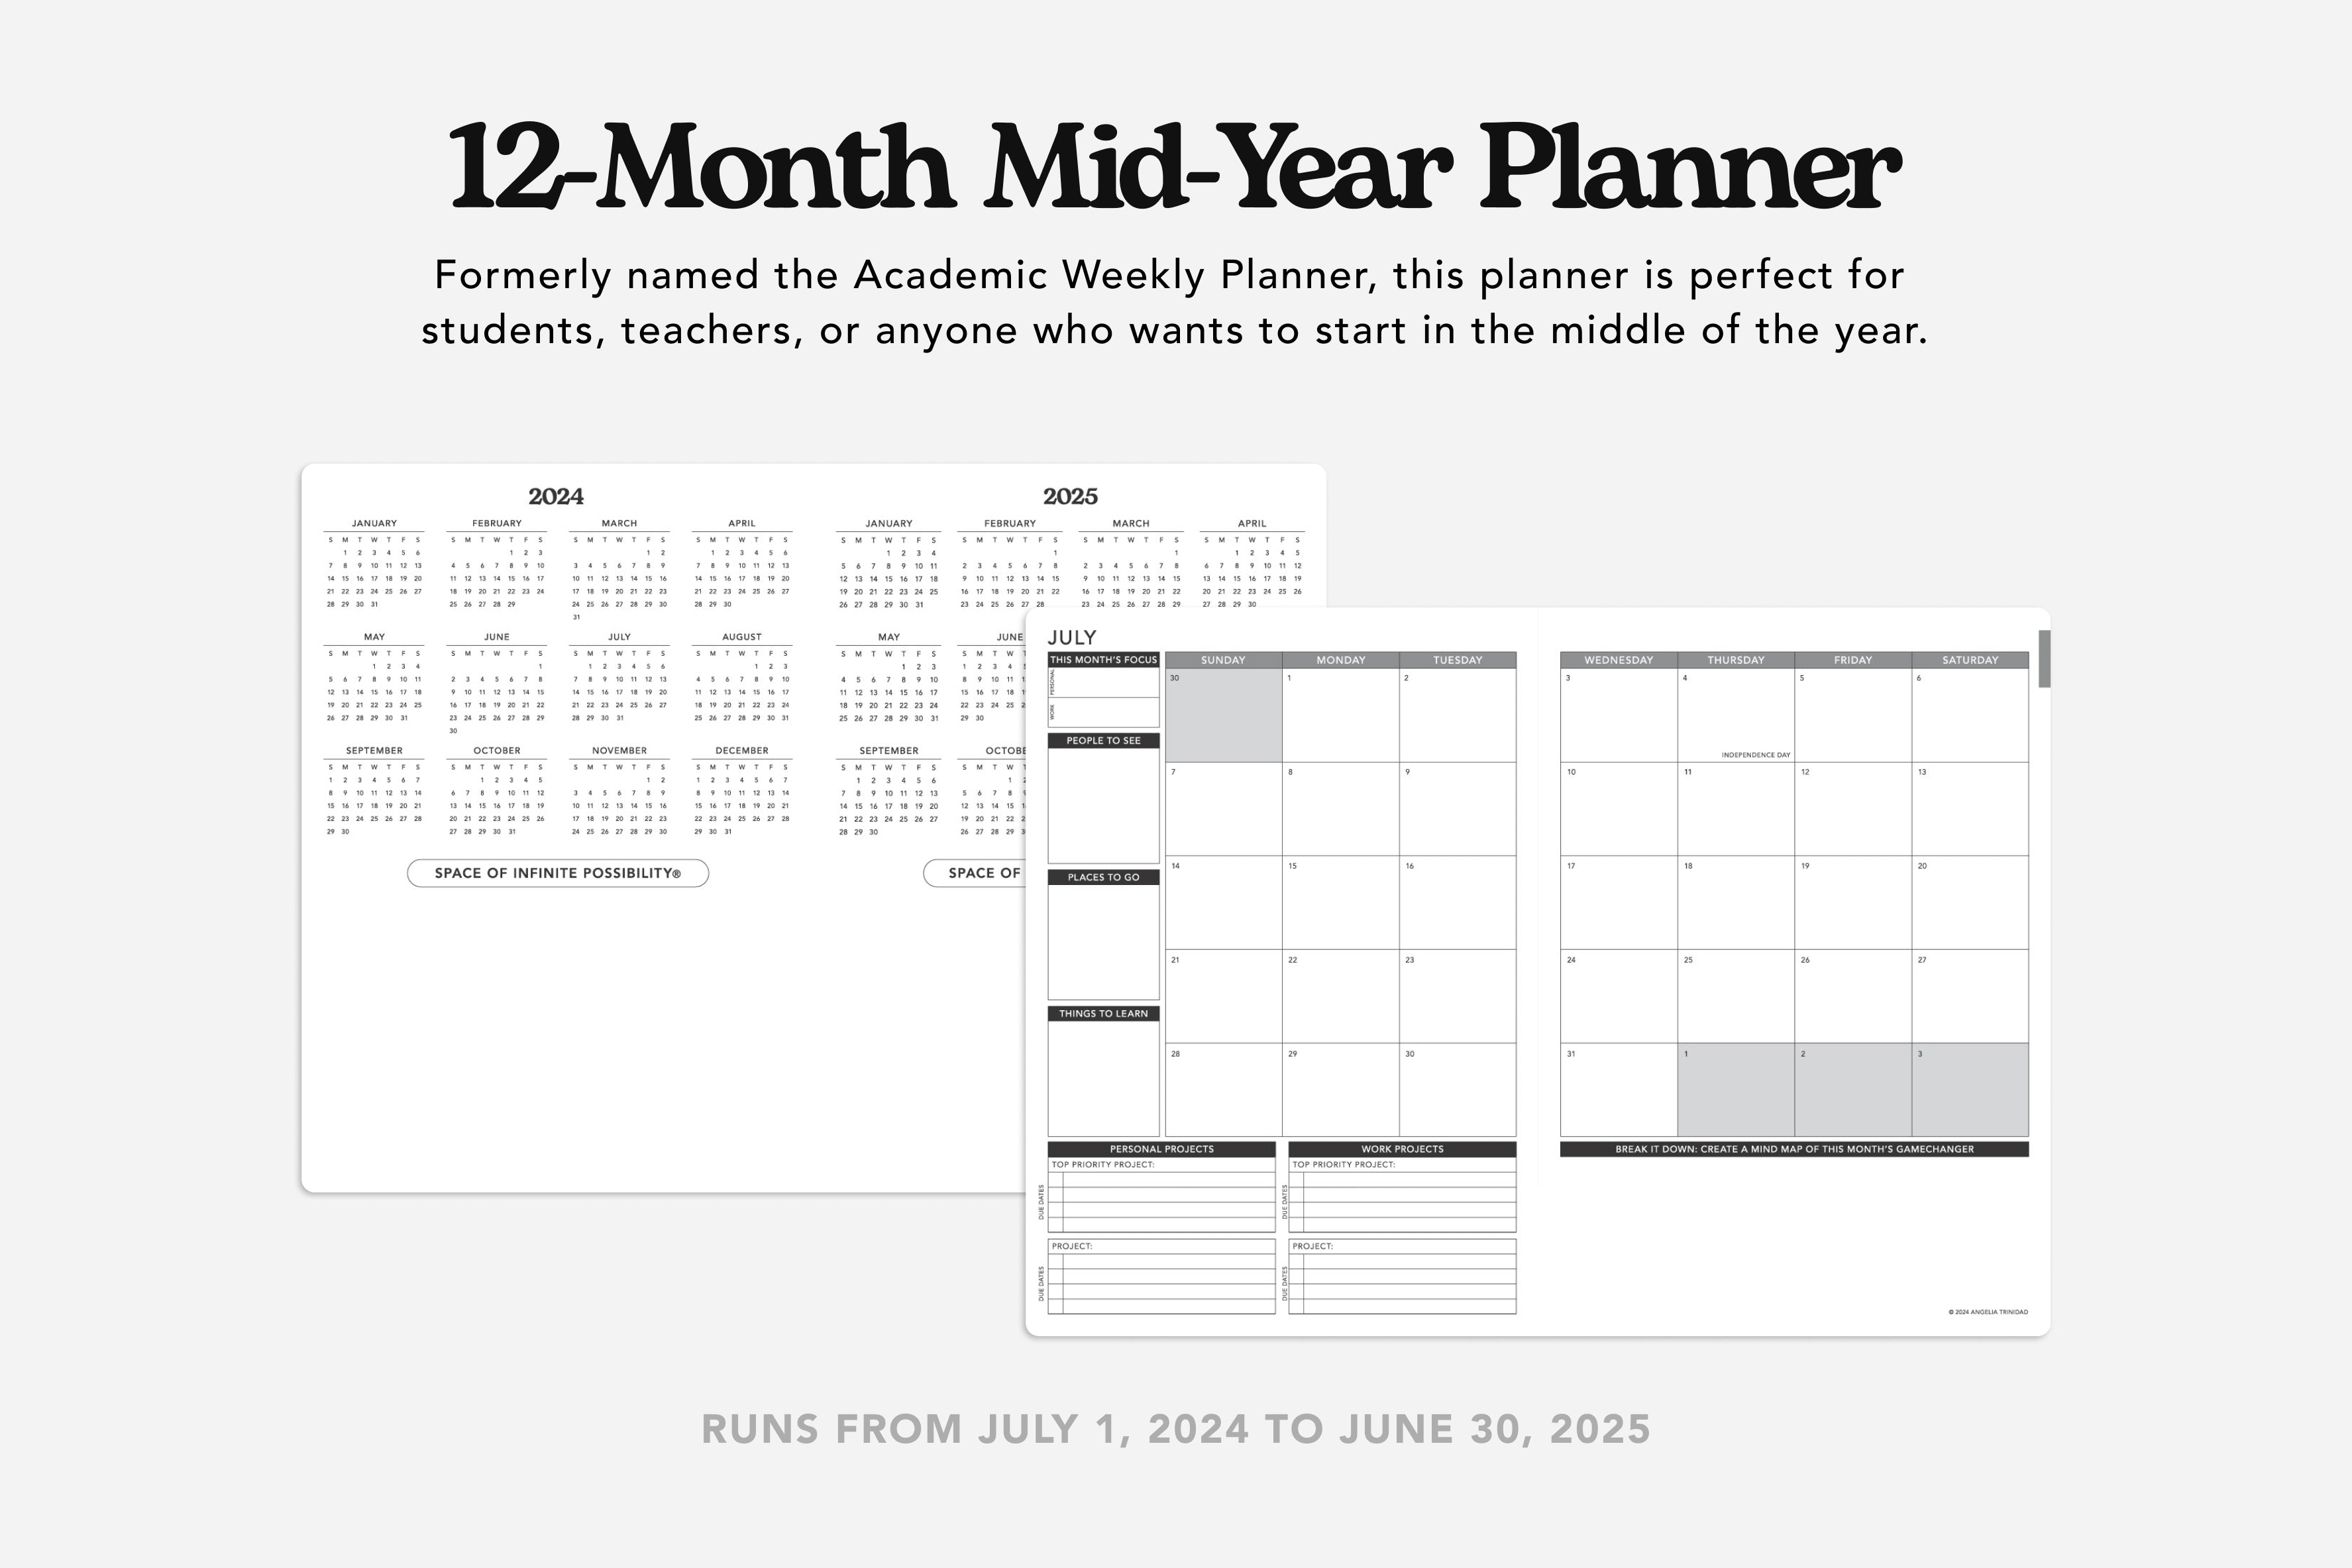 12-month mid-year planner